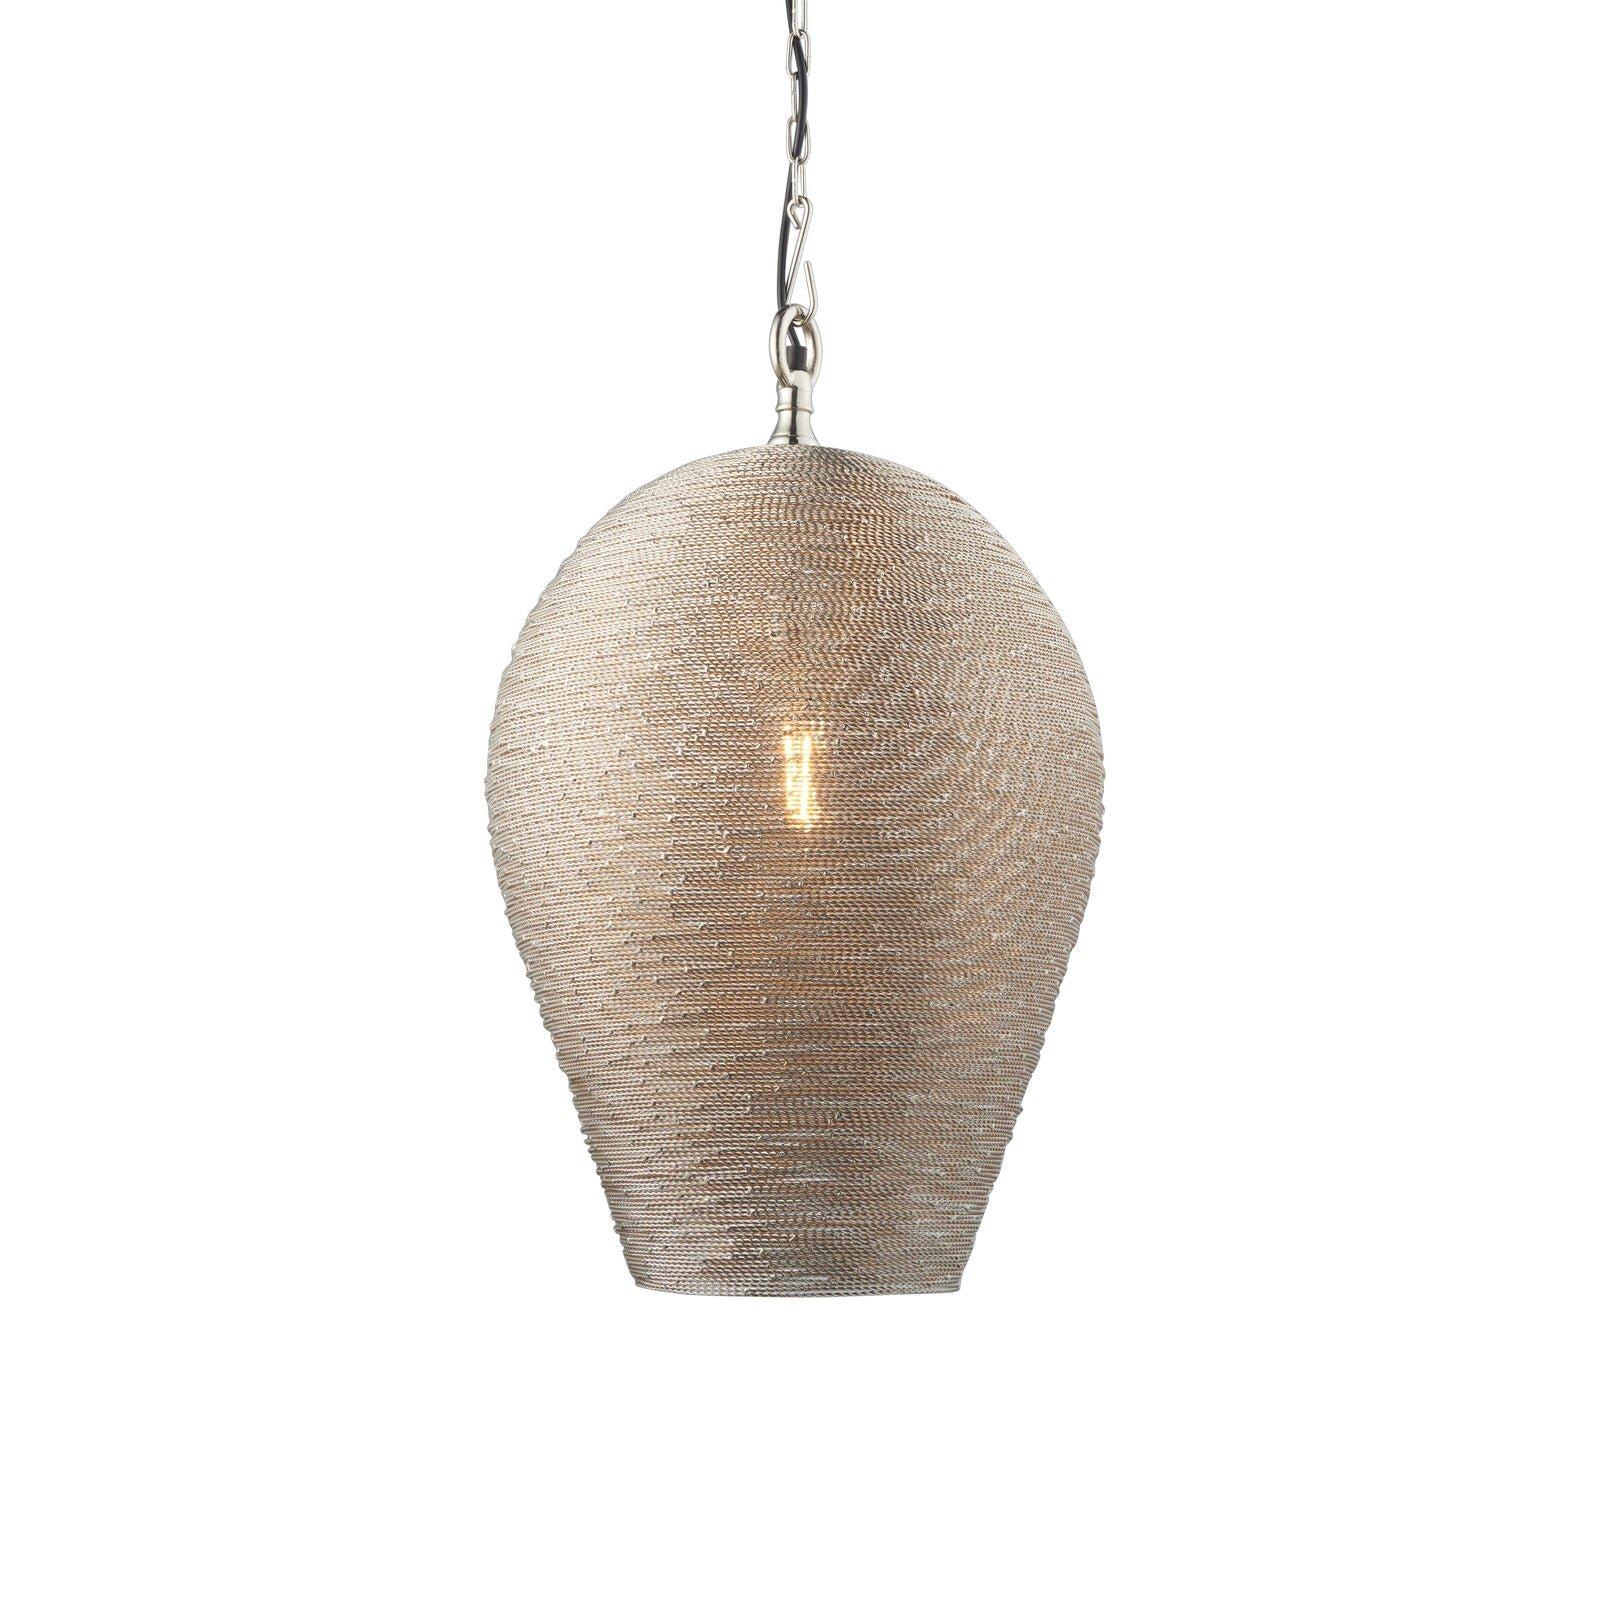 Ceiling Pendant Light - Polished Nickel Plate - 10W LED E27 - Dimmable - e10700